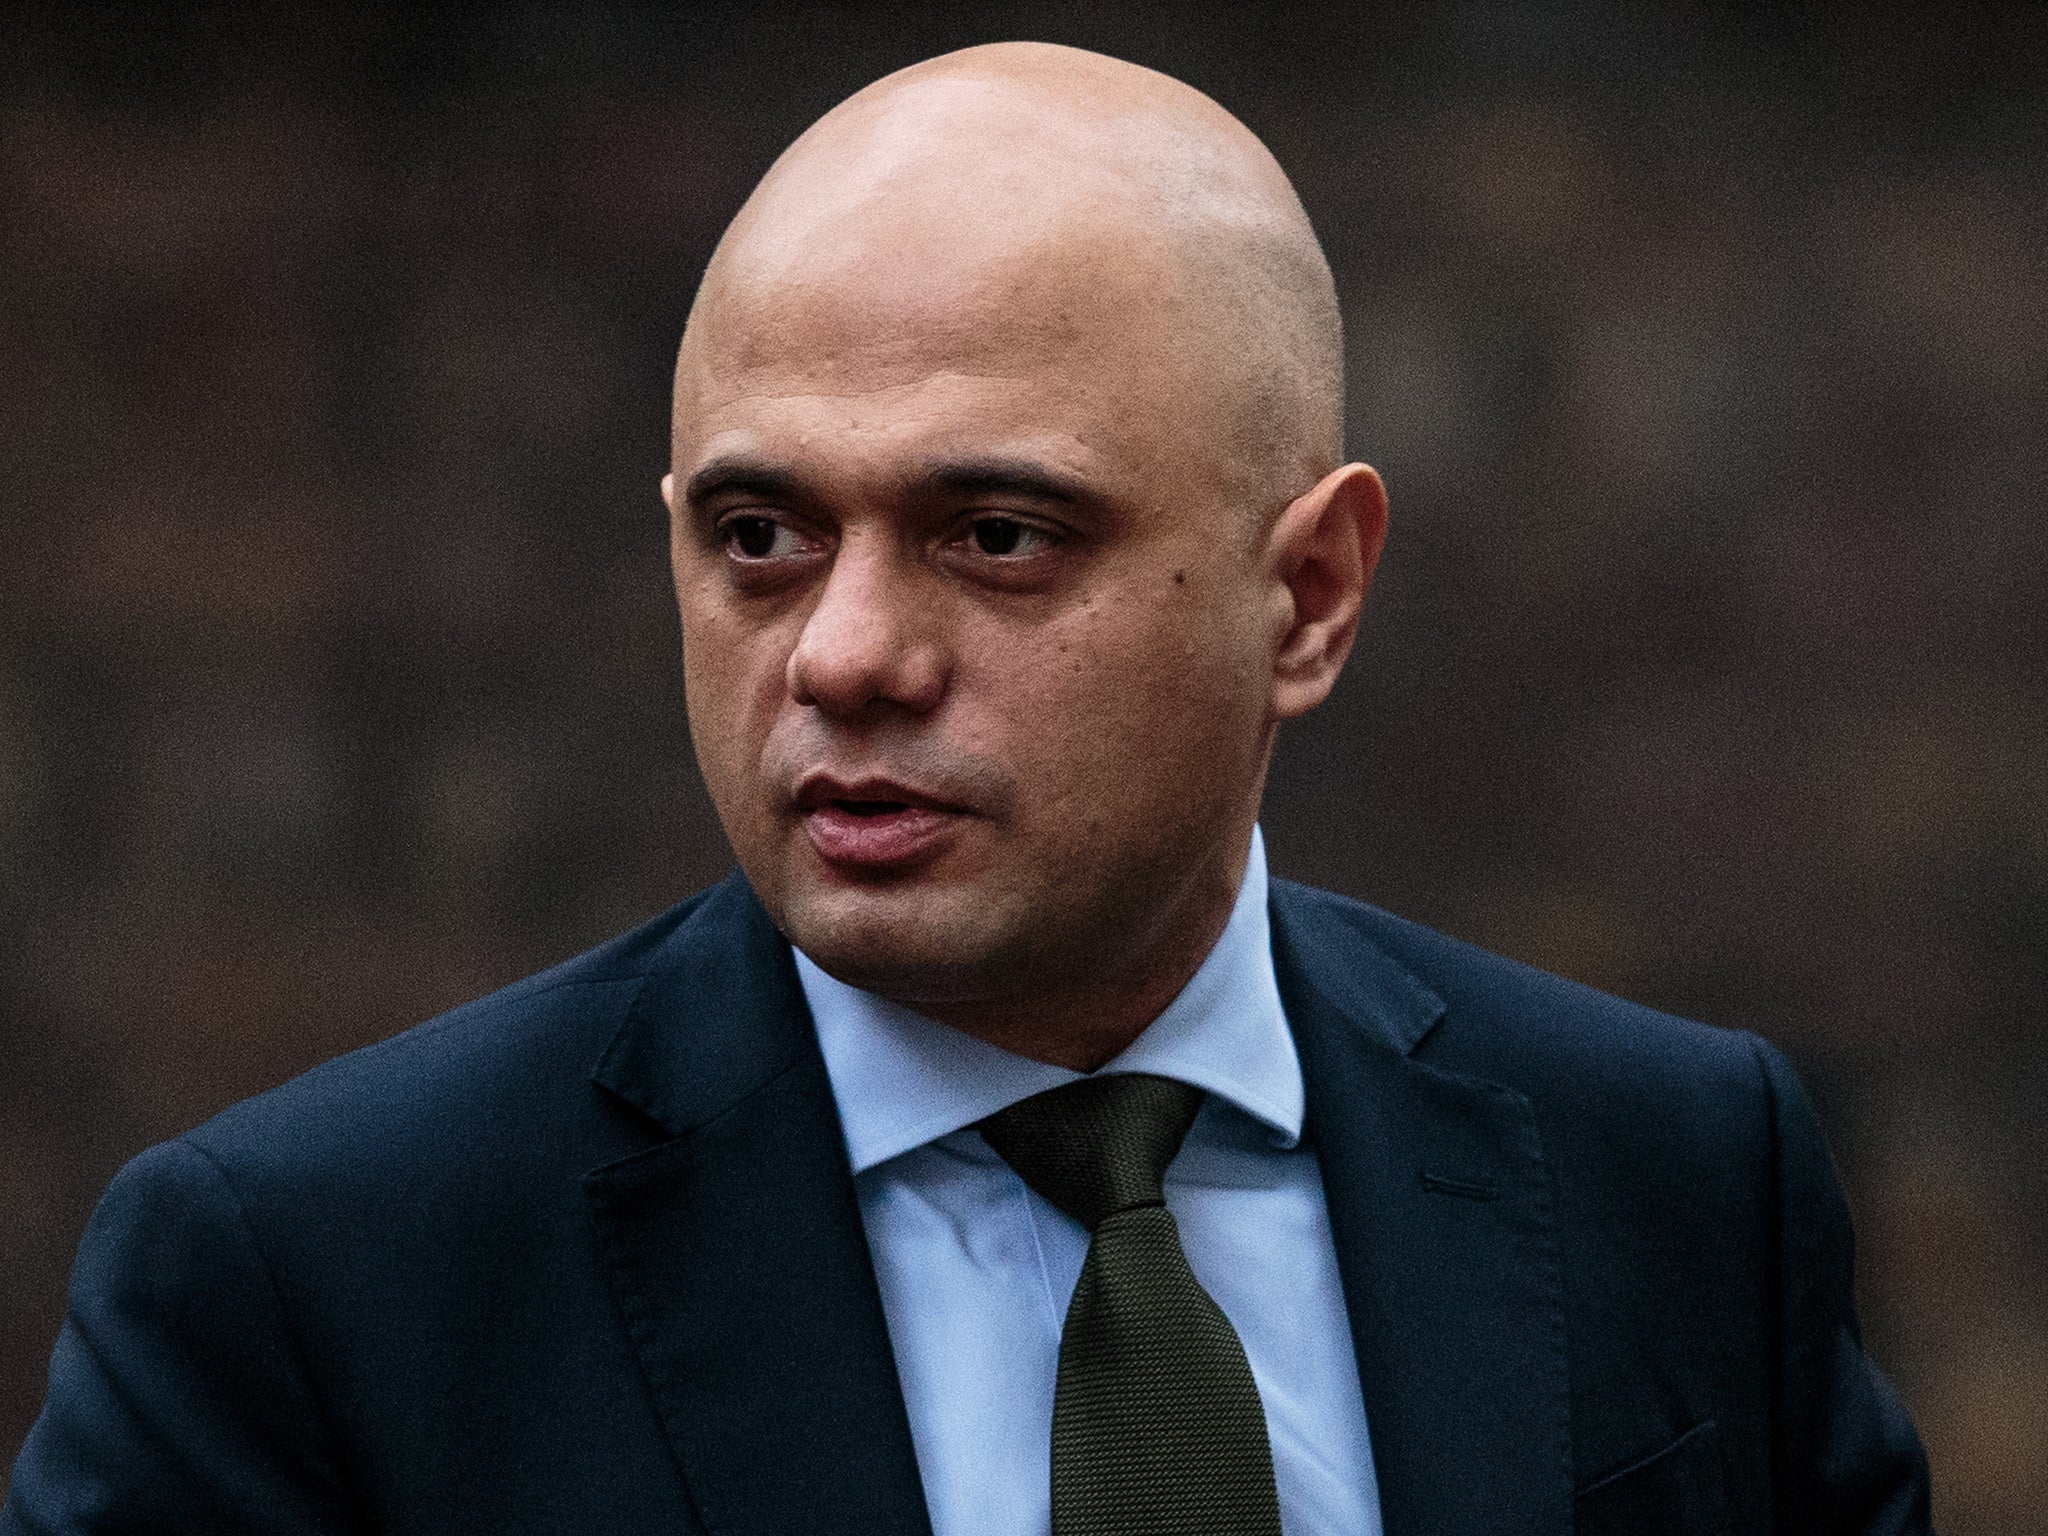 Critics say Sajid Javid has taken ‘easy way out’ by using power against Shamima Begum